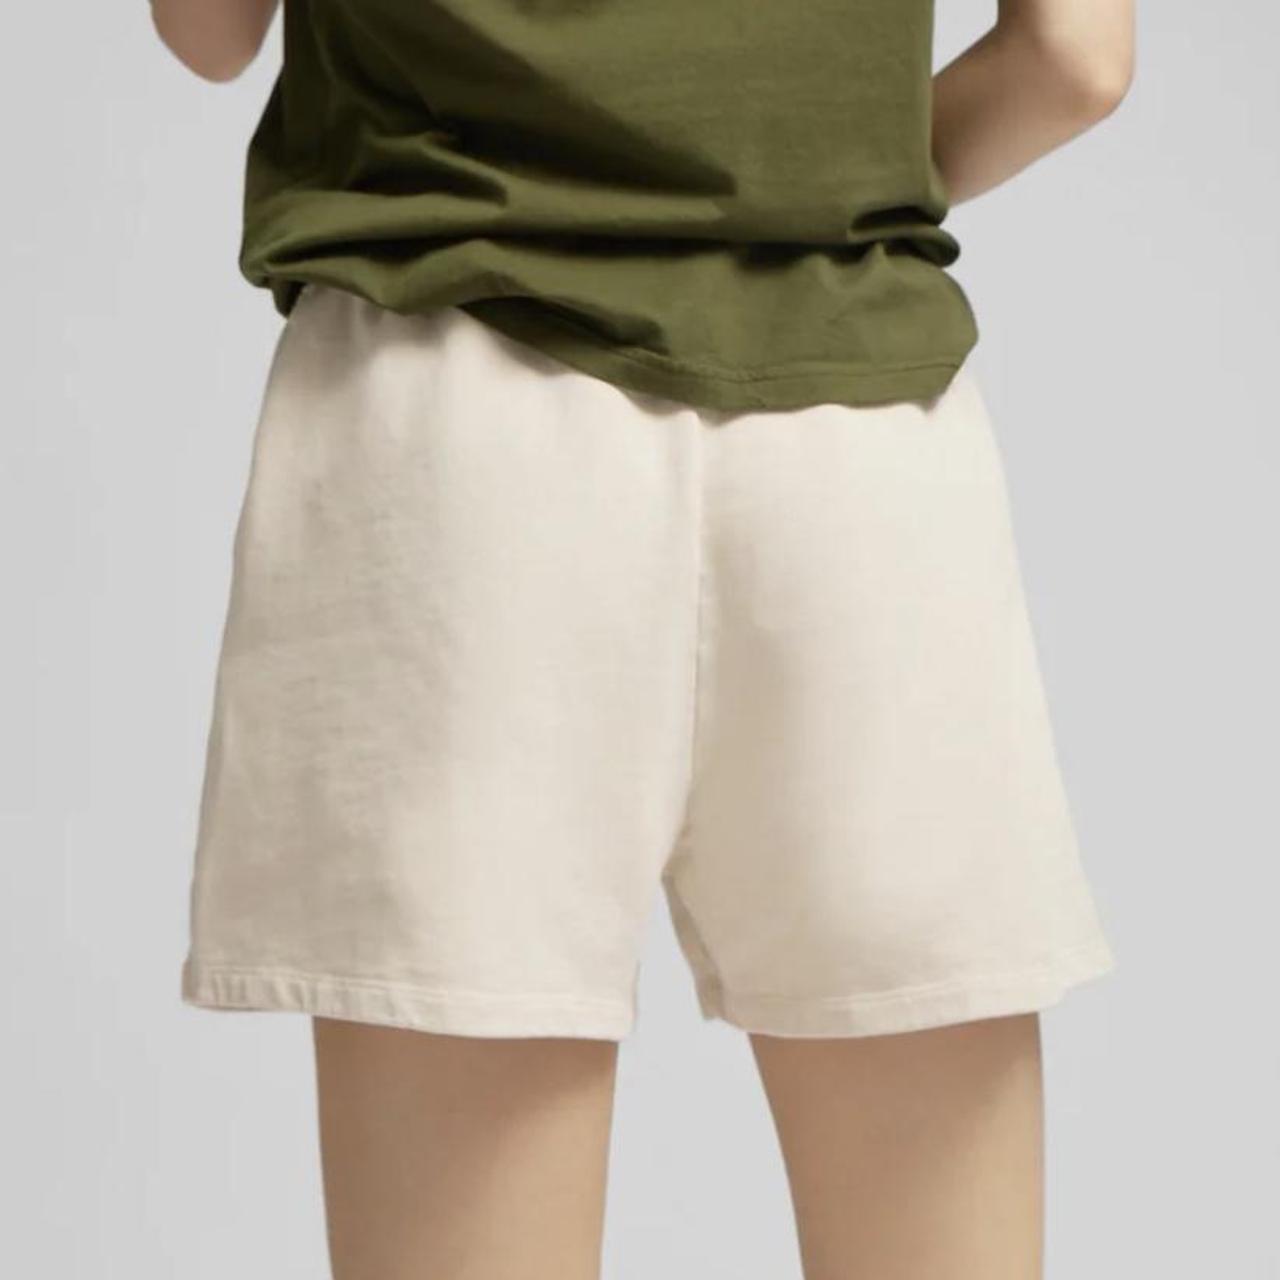 Colorful Standard Women's Cream and White Shorts (3)